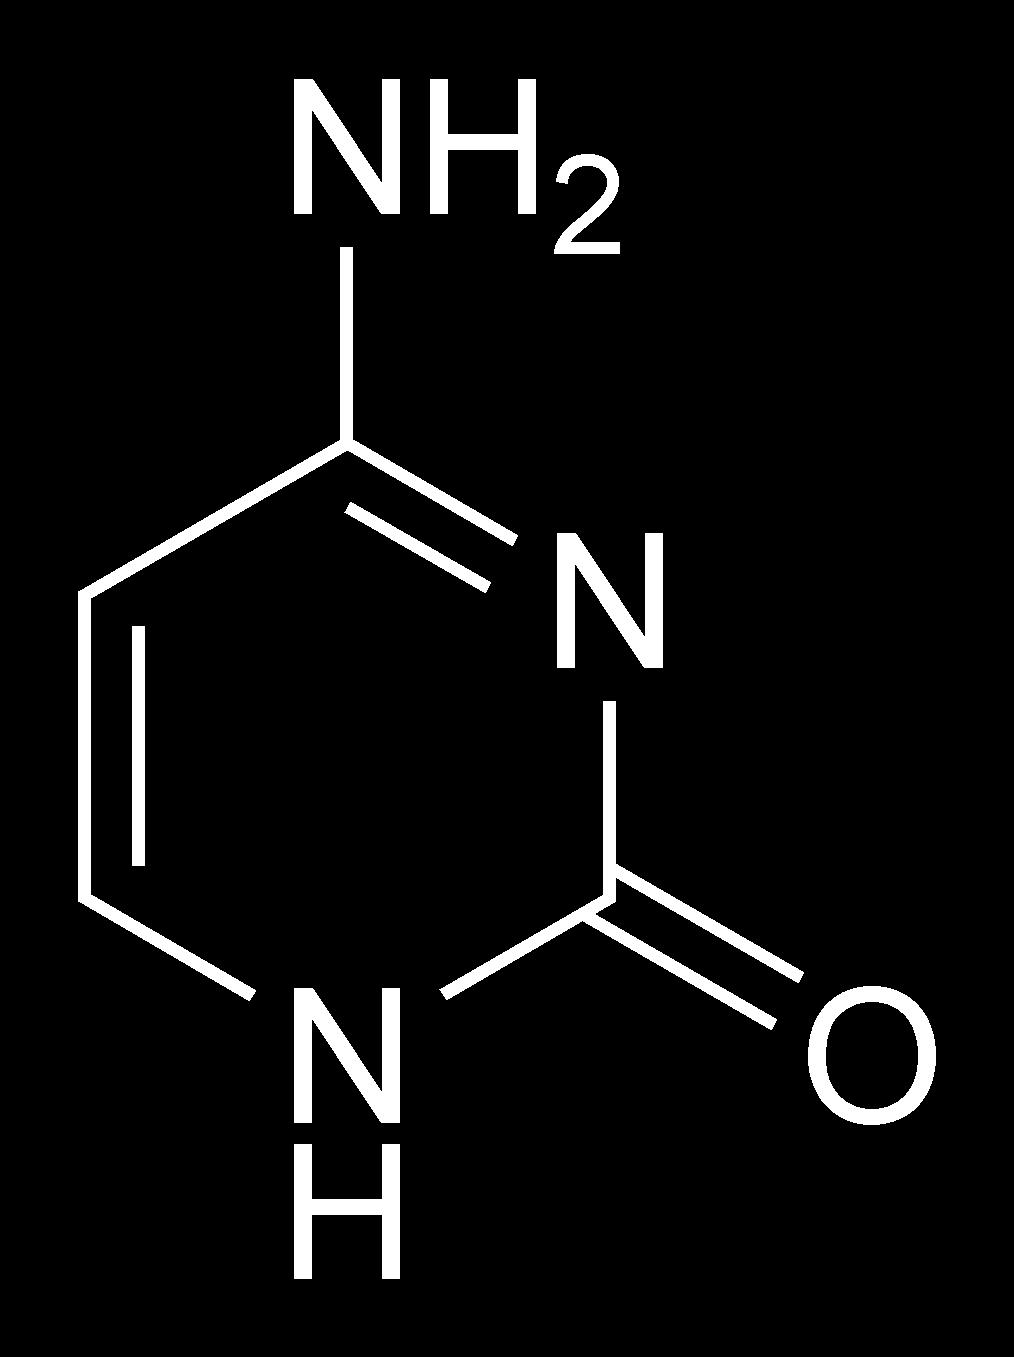 Ketone d. Amino 2. The following functional group is a. Phosphate c. Sulfhydryl b. Hydroxyl d. Amino 3.